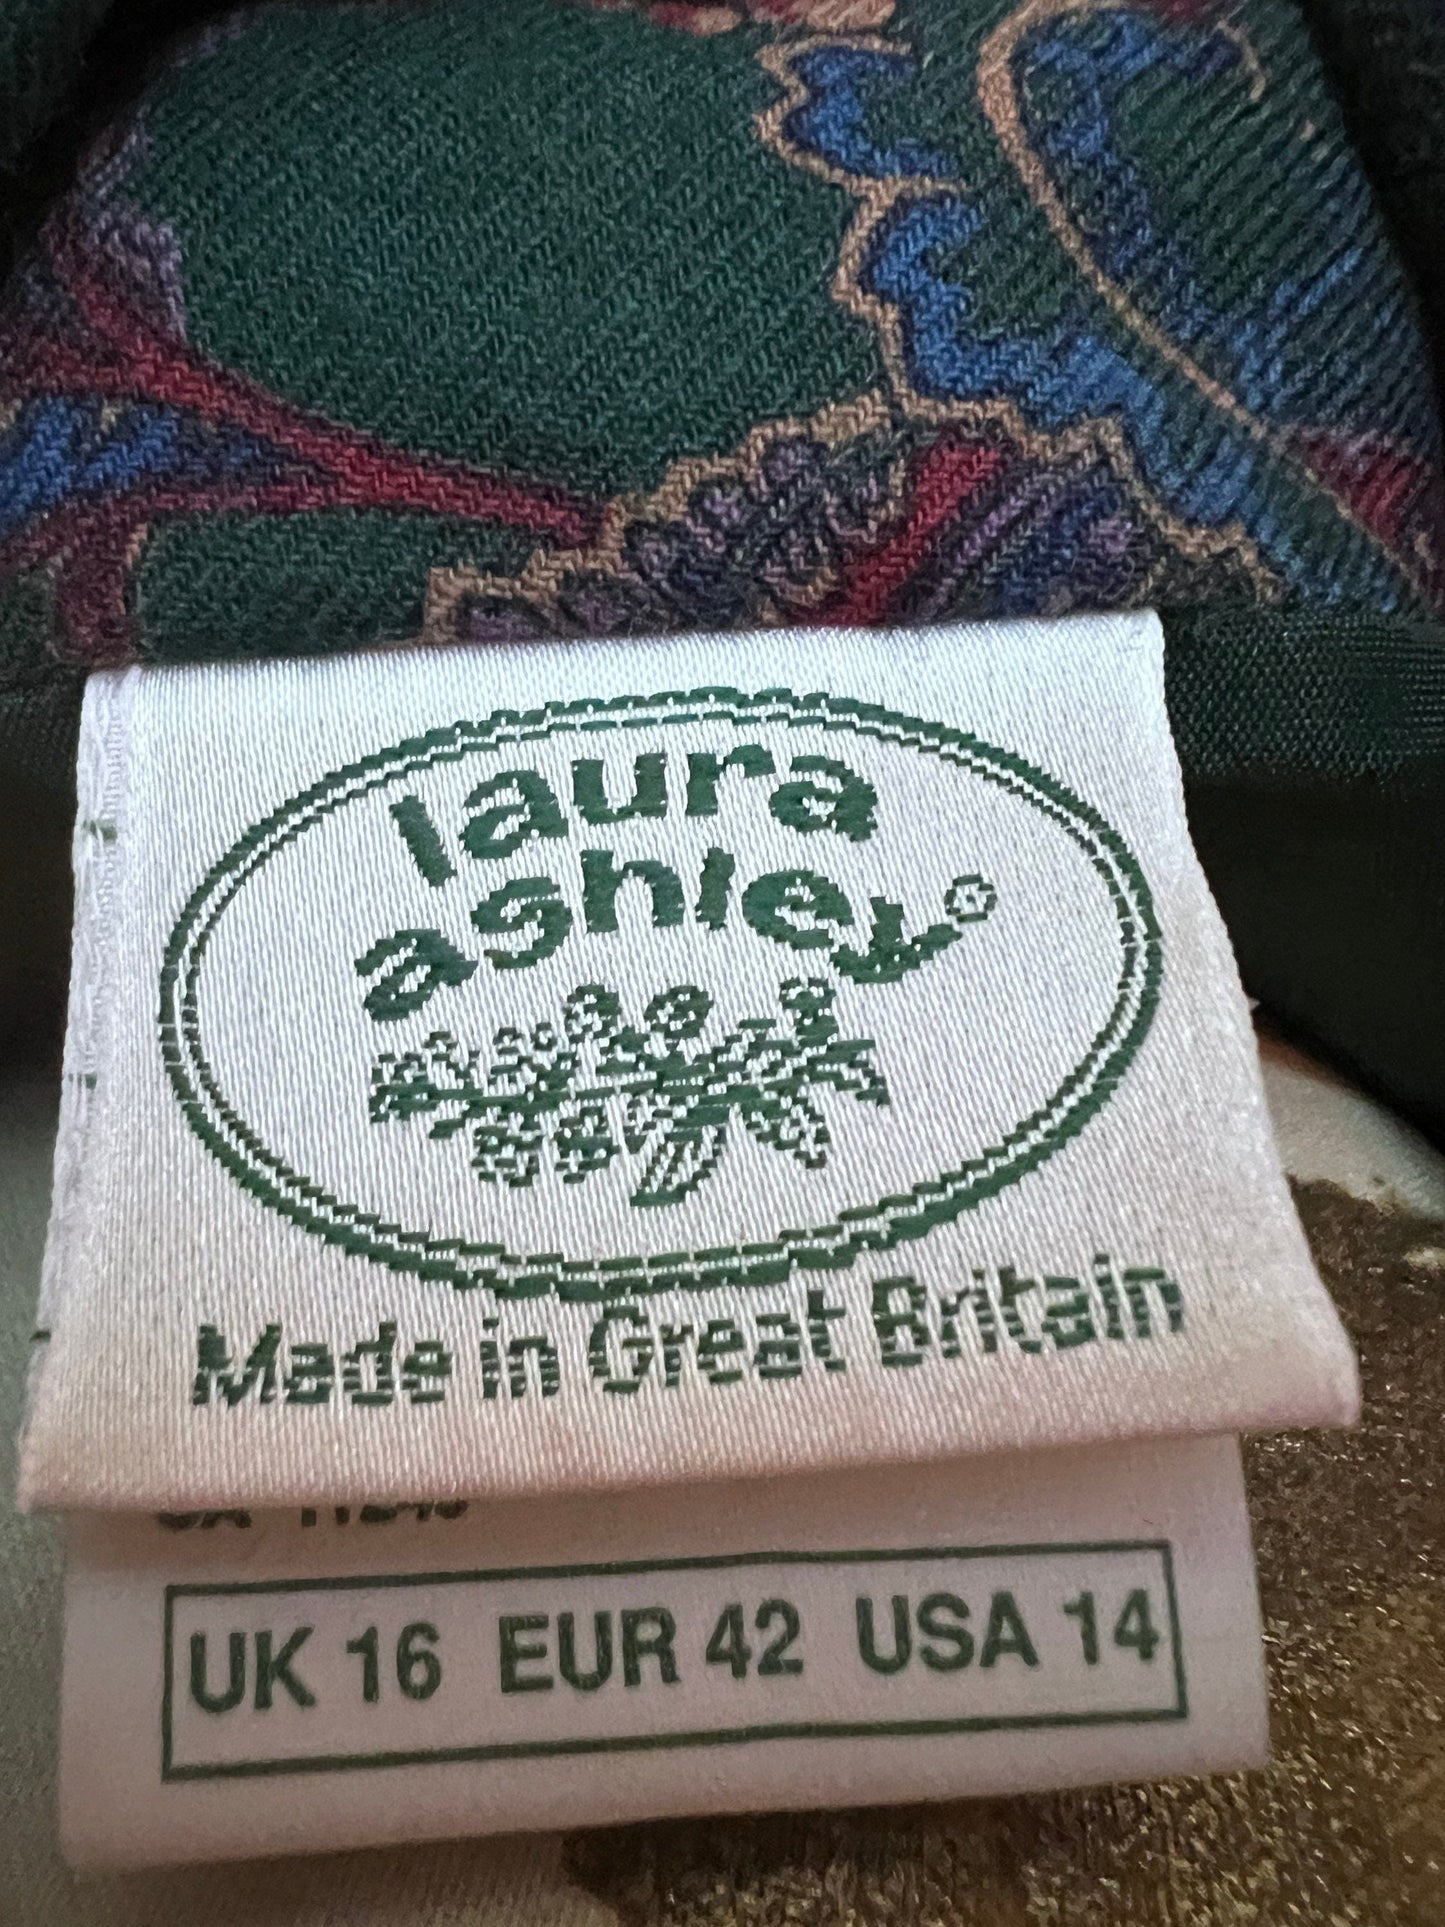 Vintage Laura Ashley Dress Chiffon Collar Paisley Tie Back Dress - UK16 - Bottle Green Paisley Brushed Cotton - Made in Great Britain 1980s